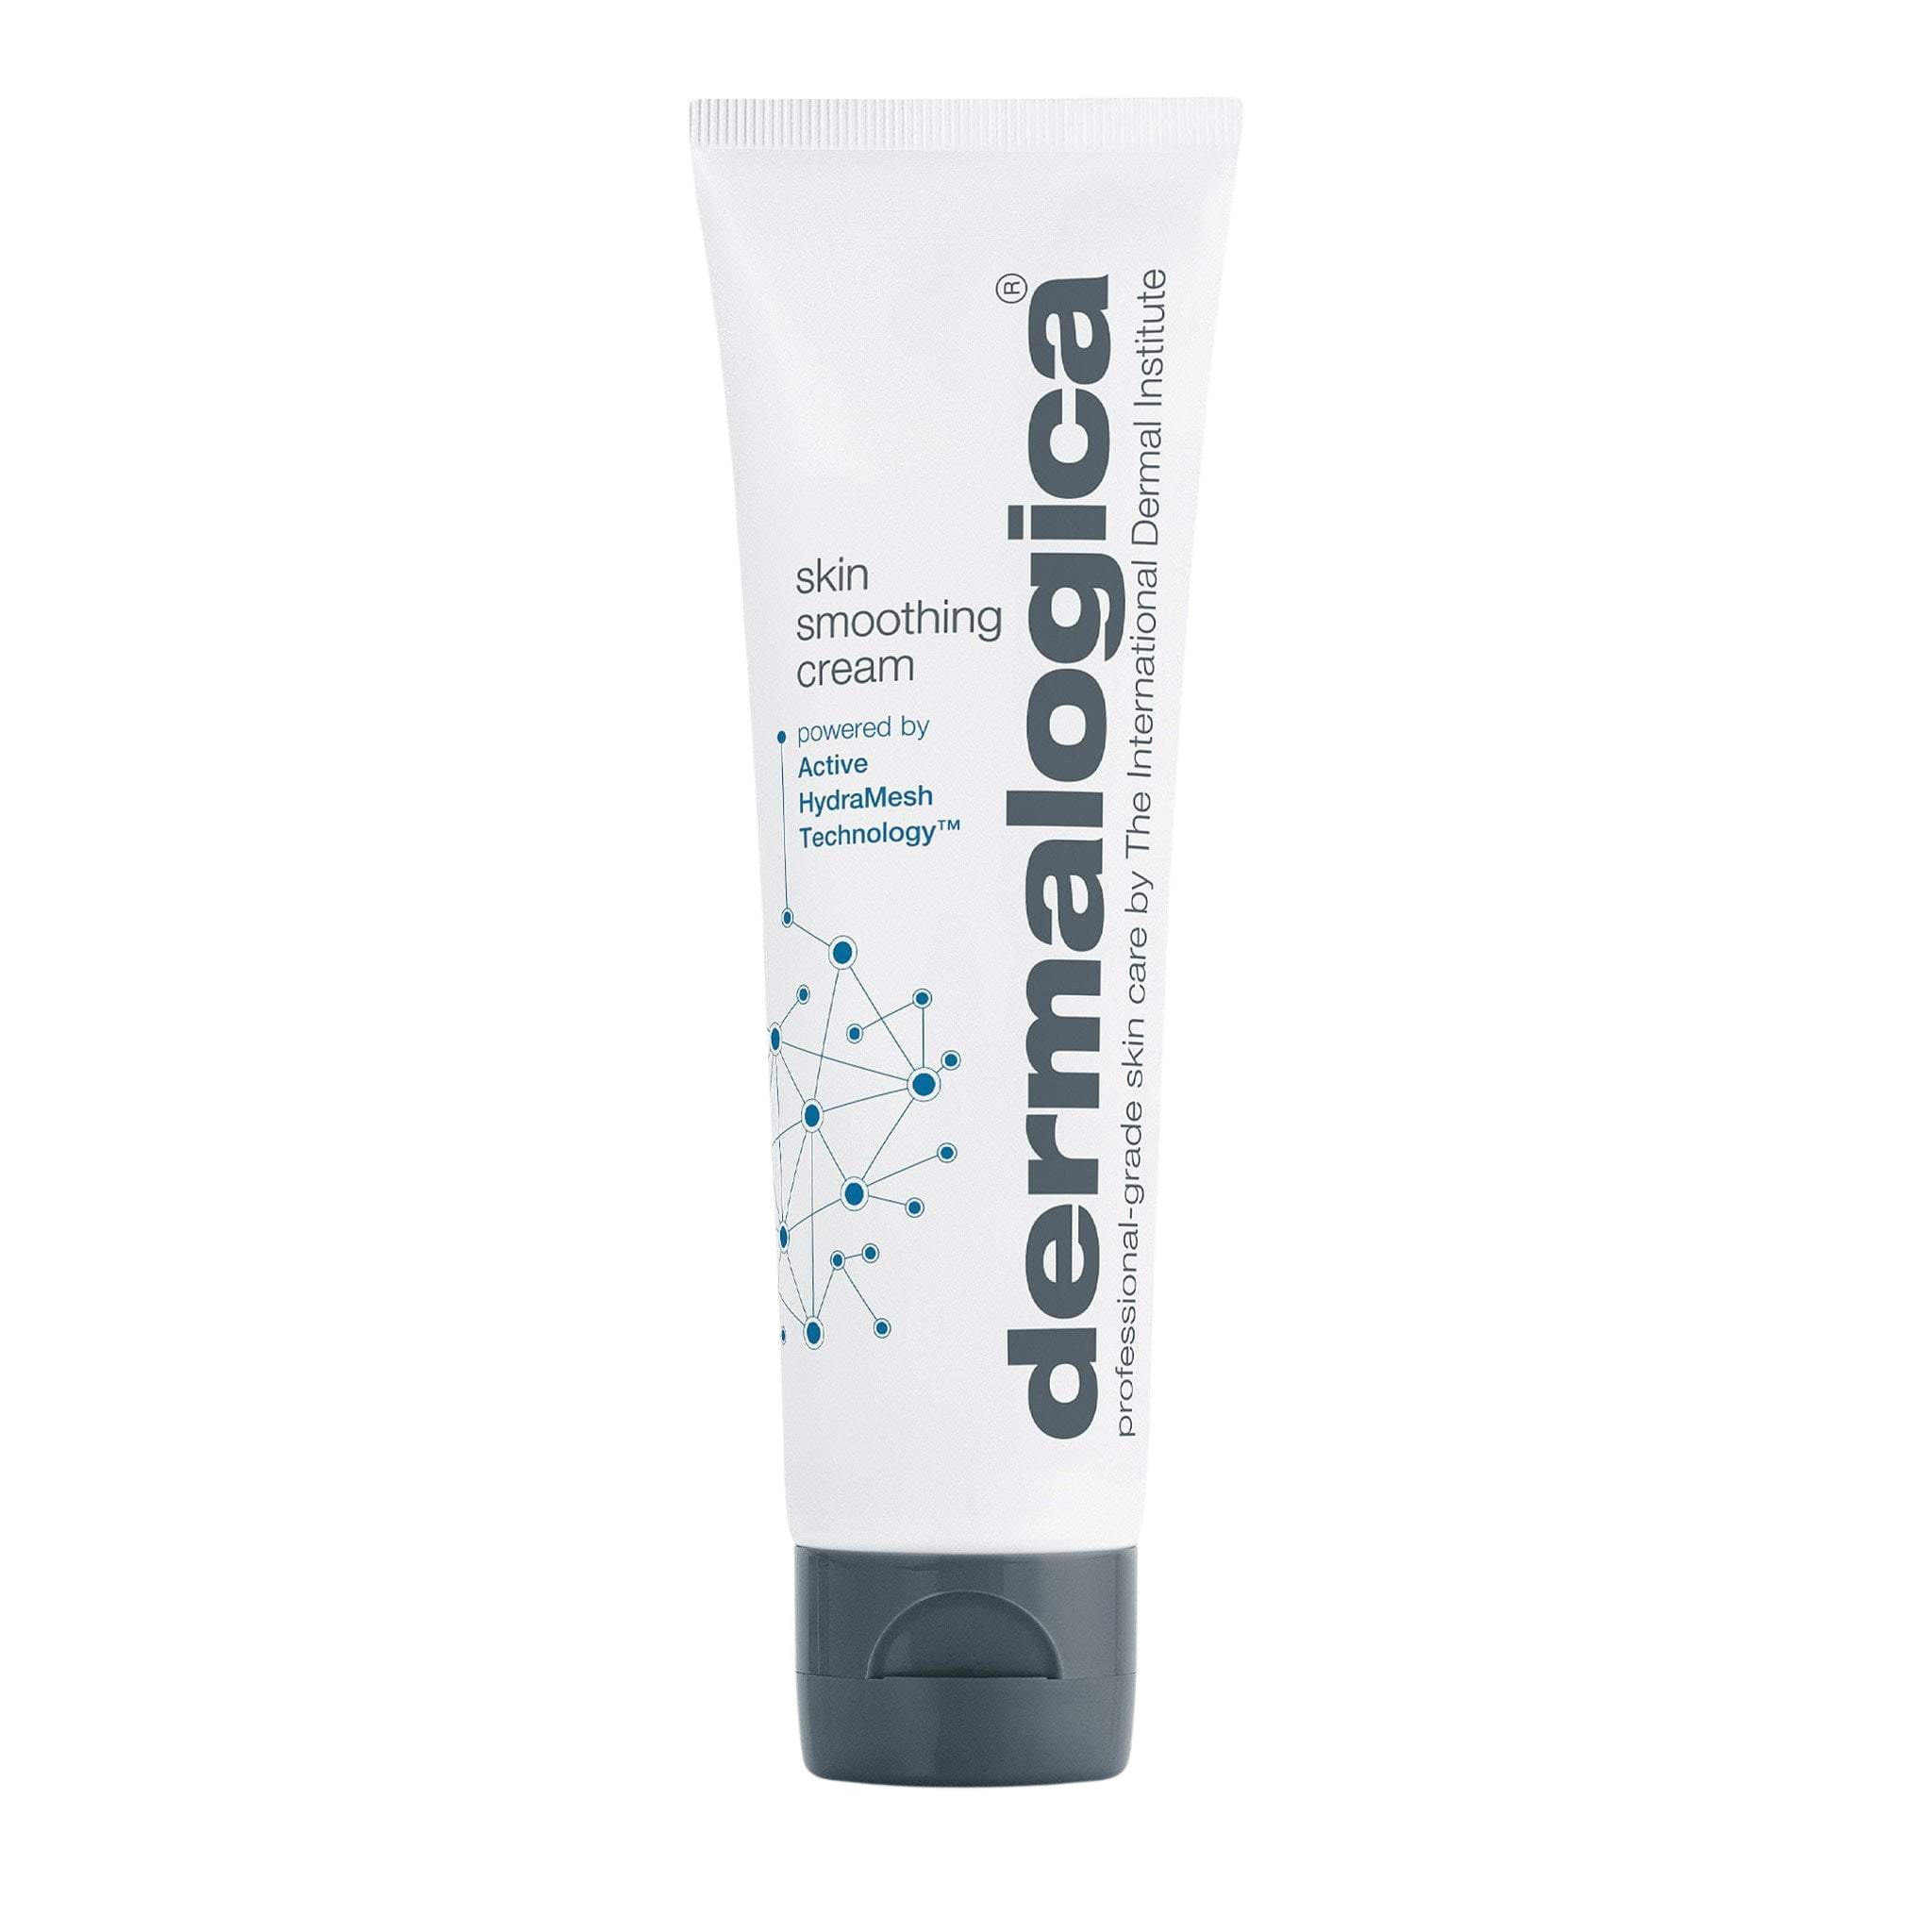 Load image into Gallery viewer, Dermalogica Skin Smoothing Cream- 3.4 oz
